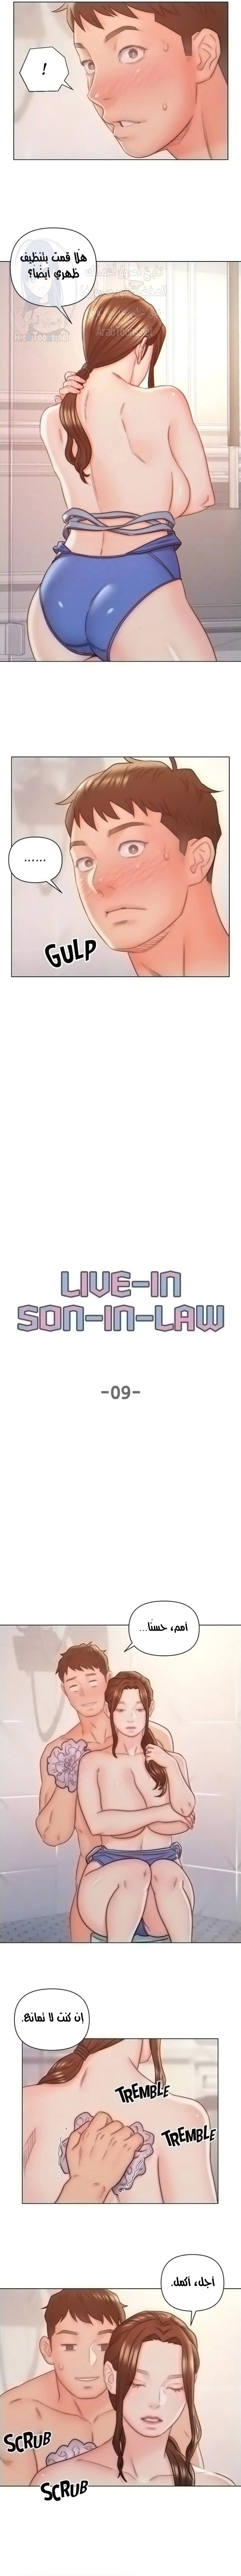 Live-In Son-in-Law - 9 - 665599886249a.webp